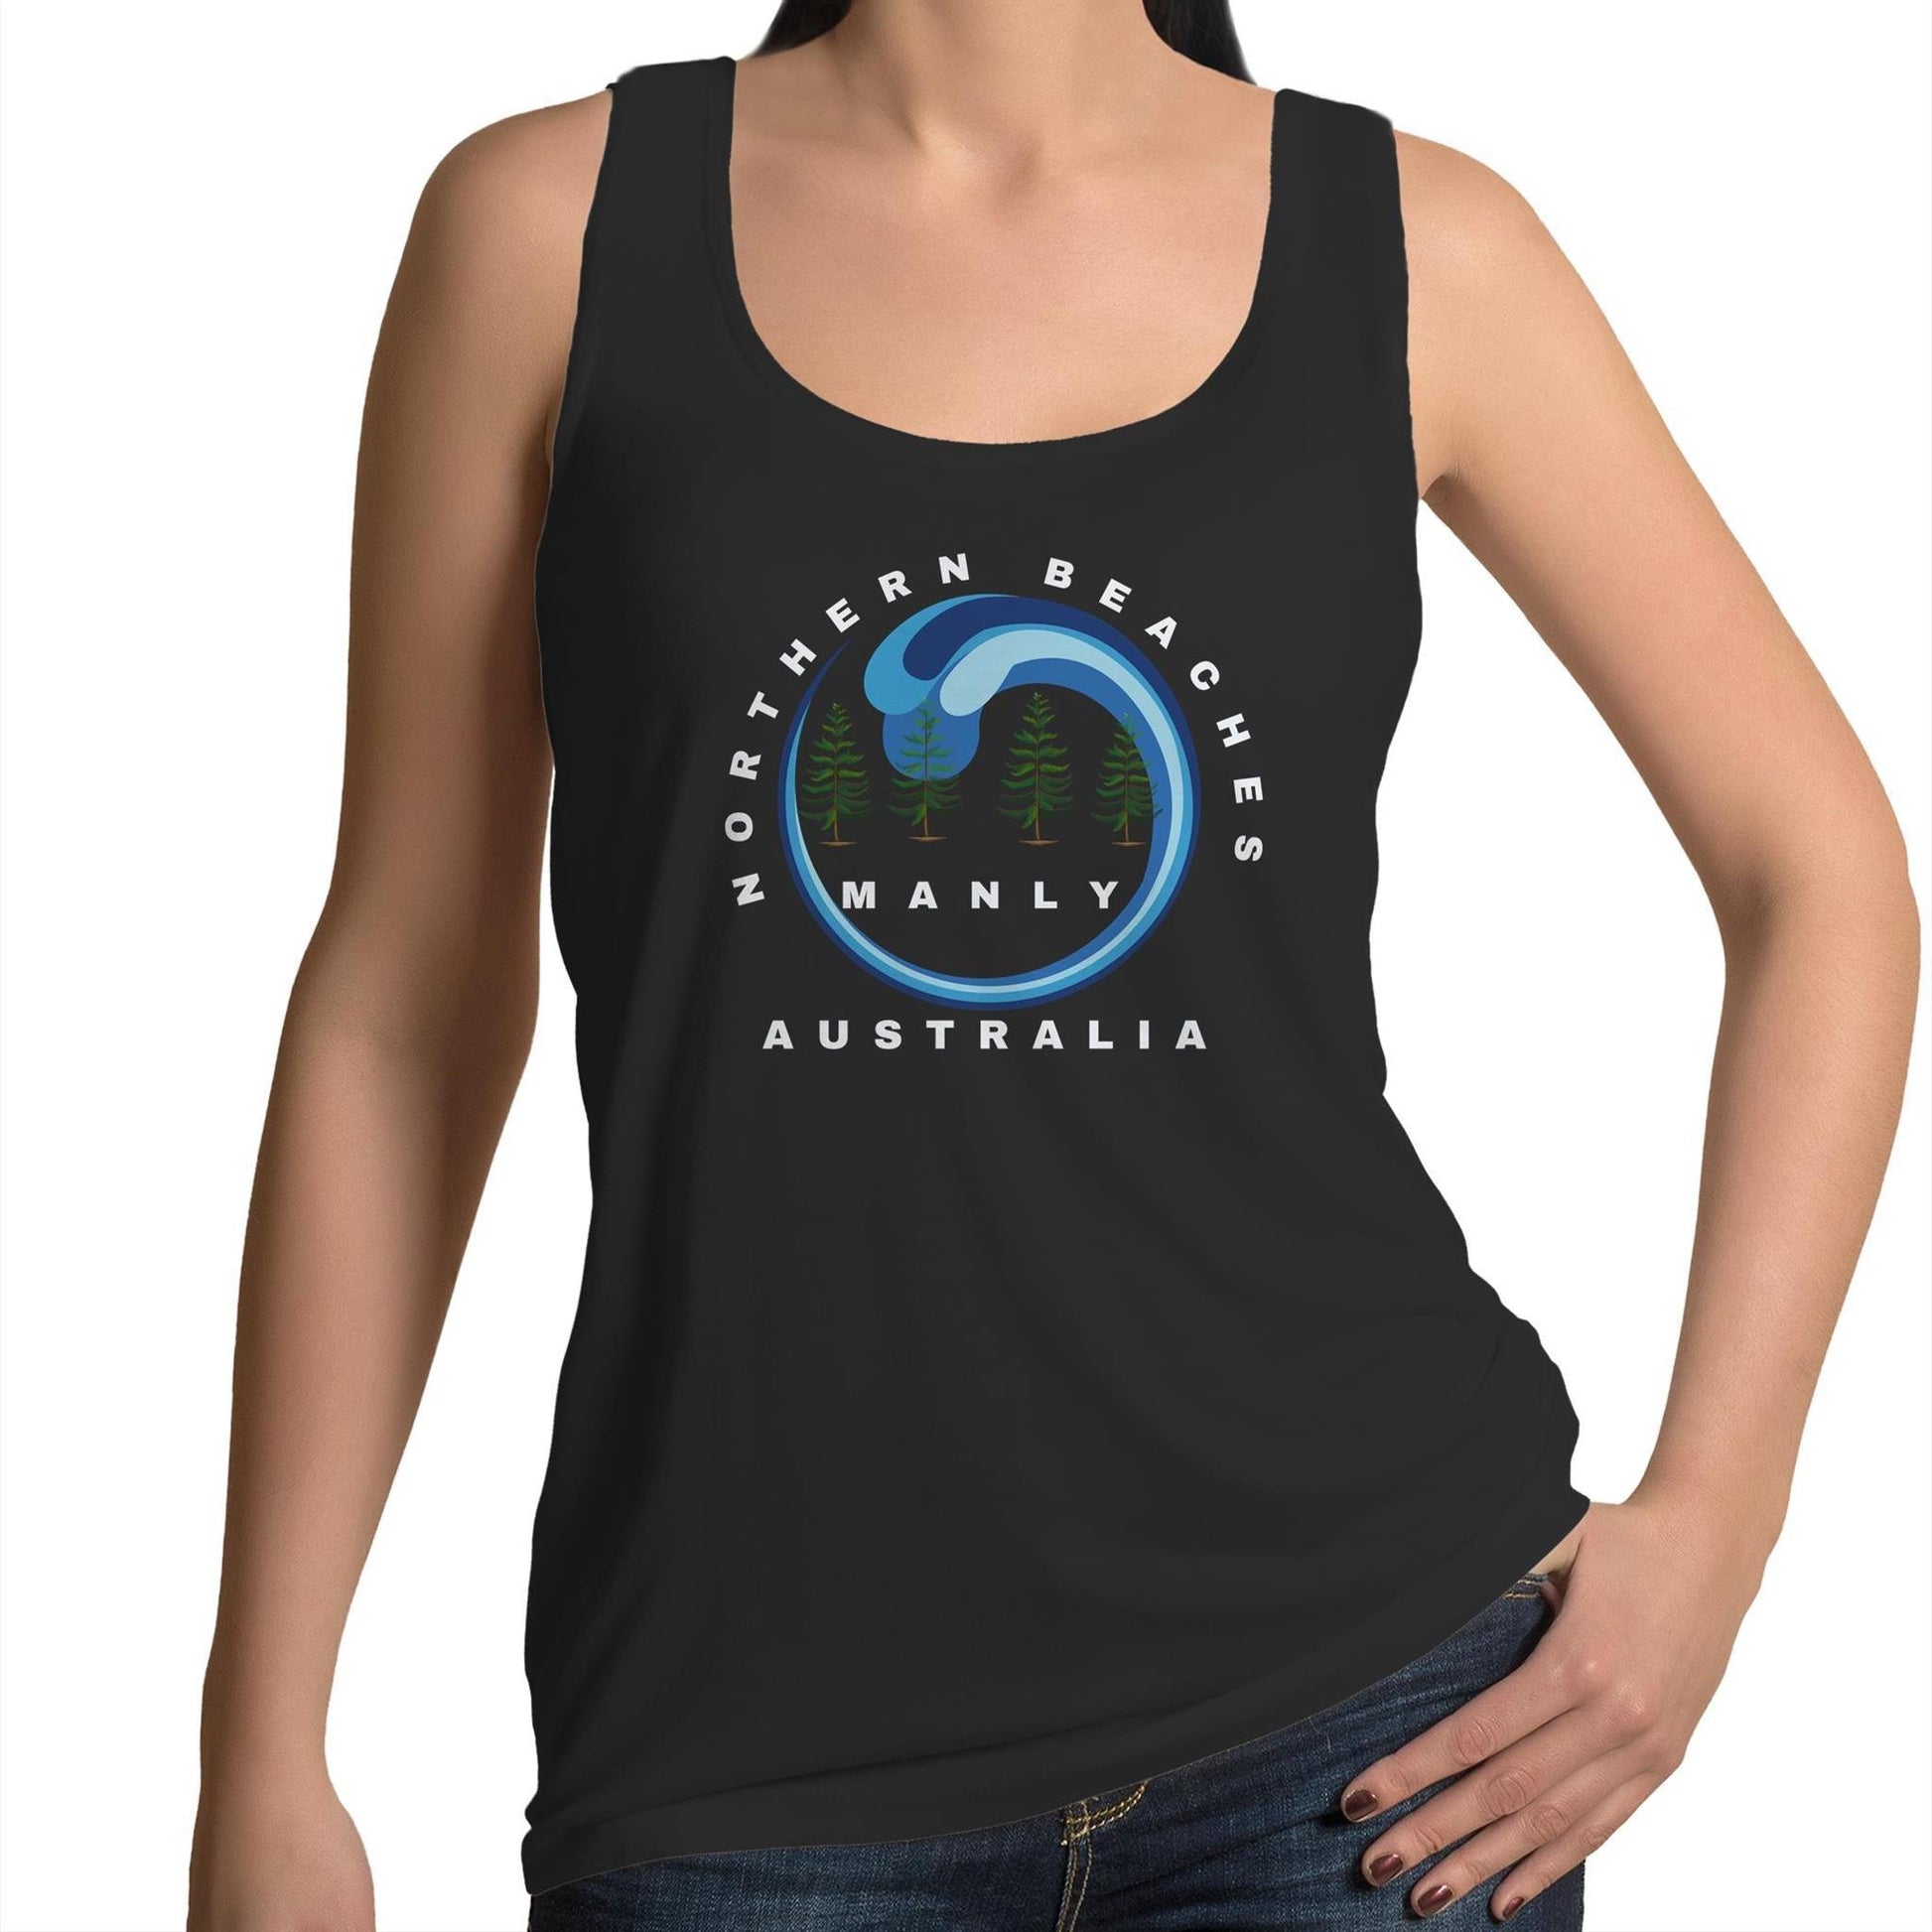 Classic Cotton Women's Singlet Tee Northern Beaches logo design - Lost Manly Shop